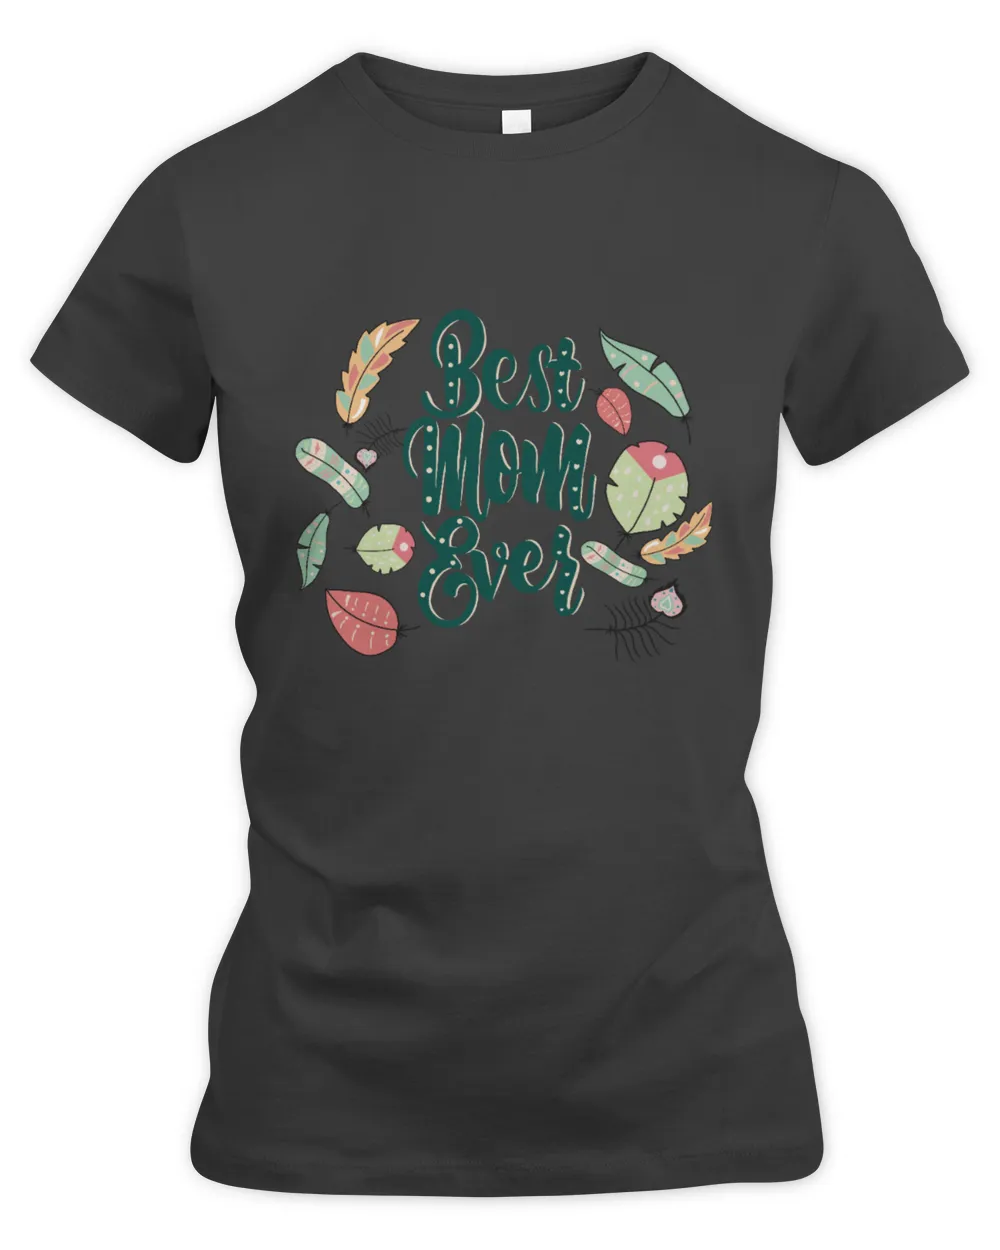 Best mom ever - with love design